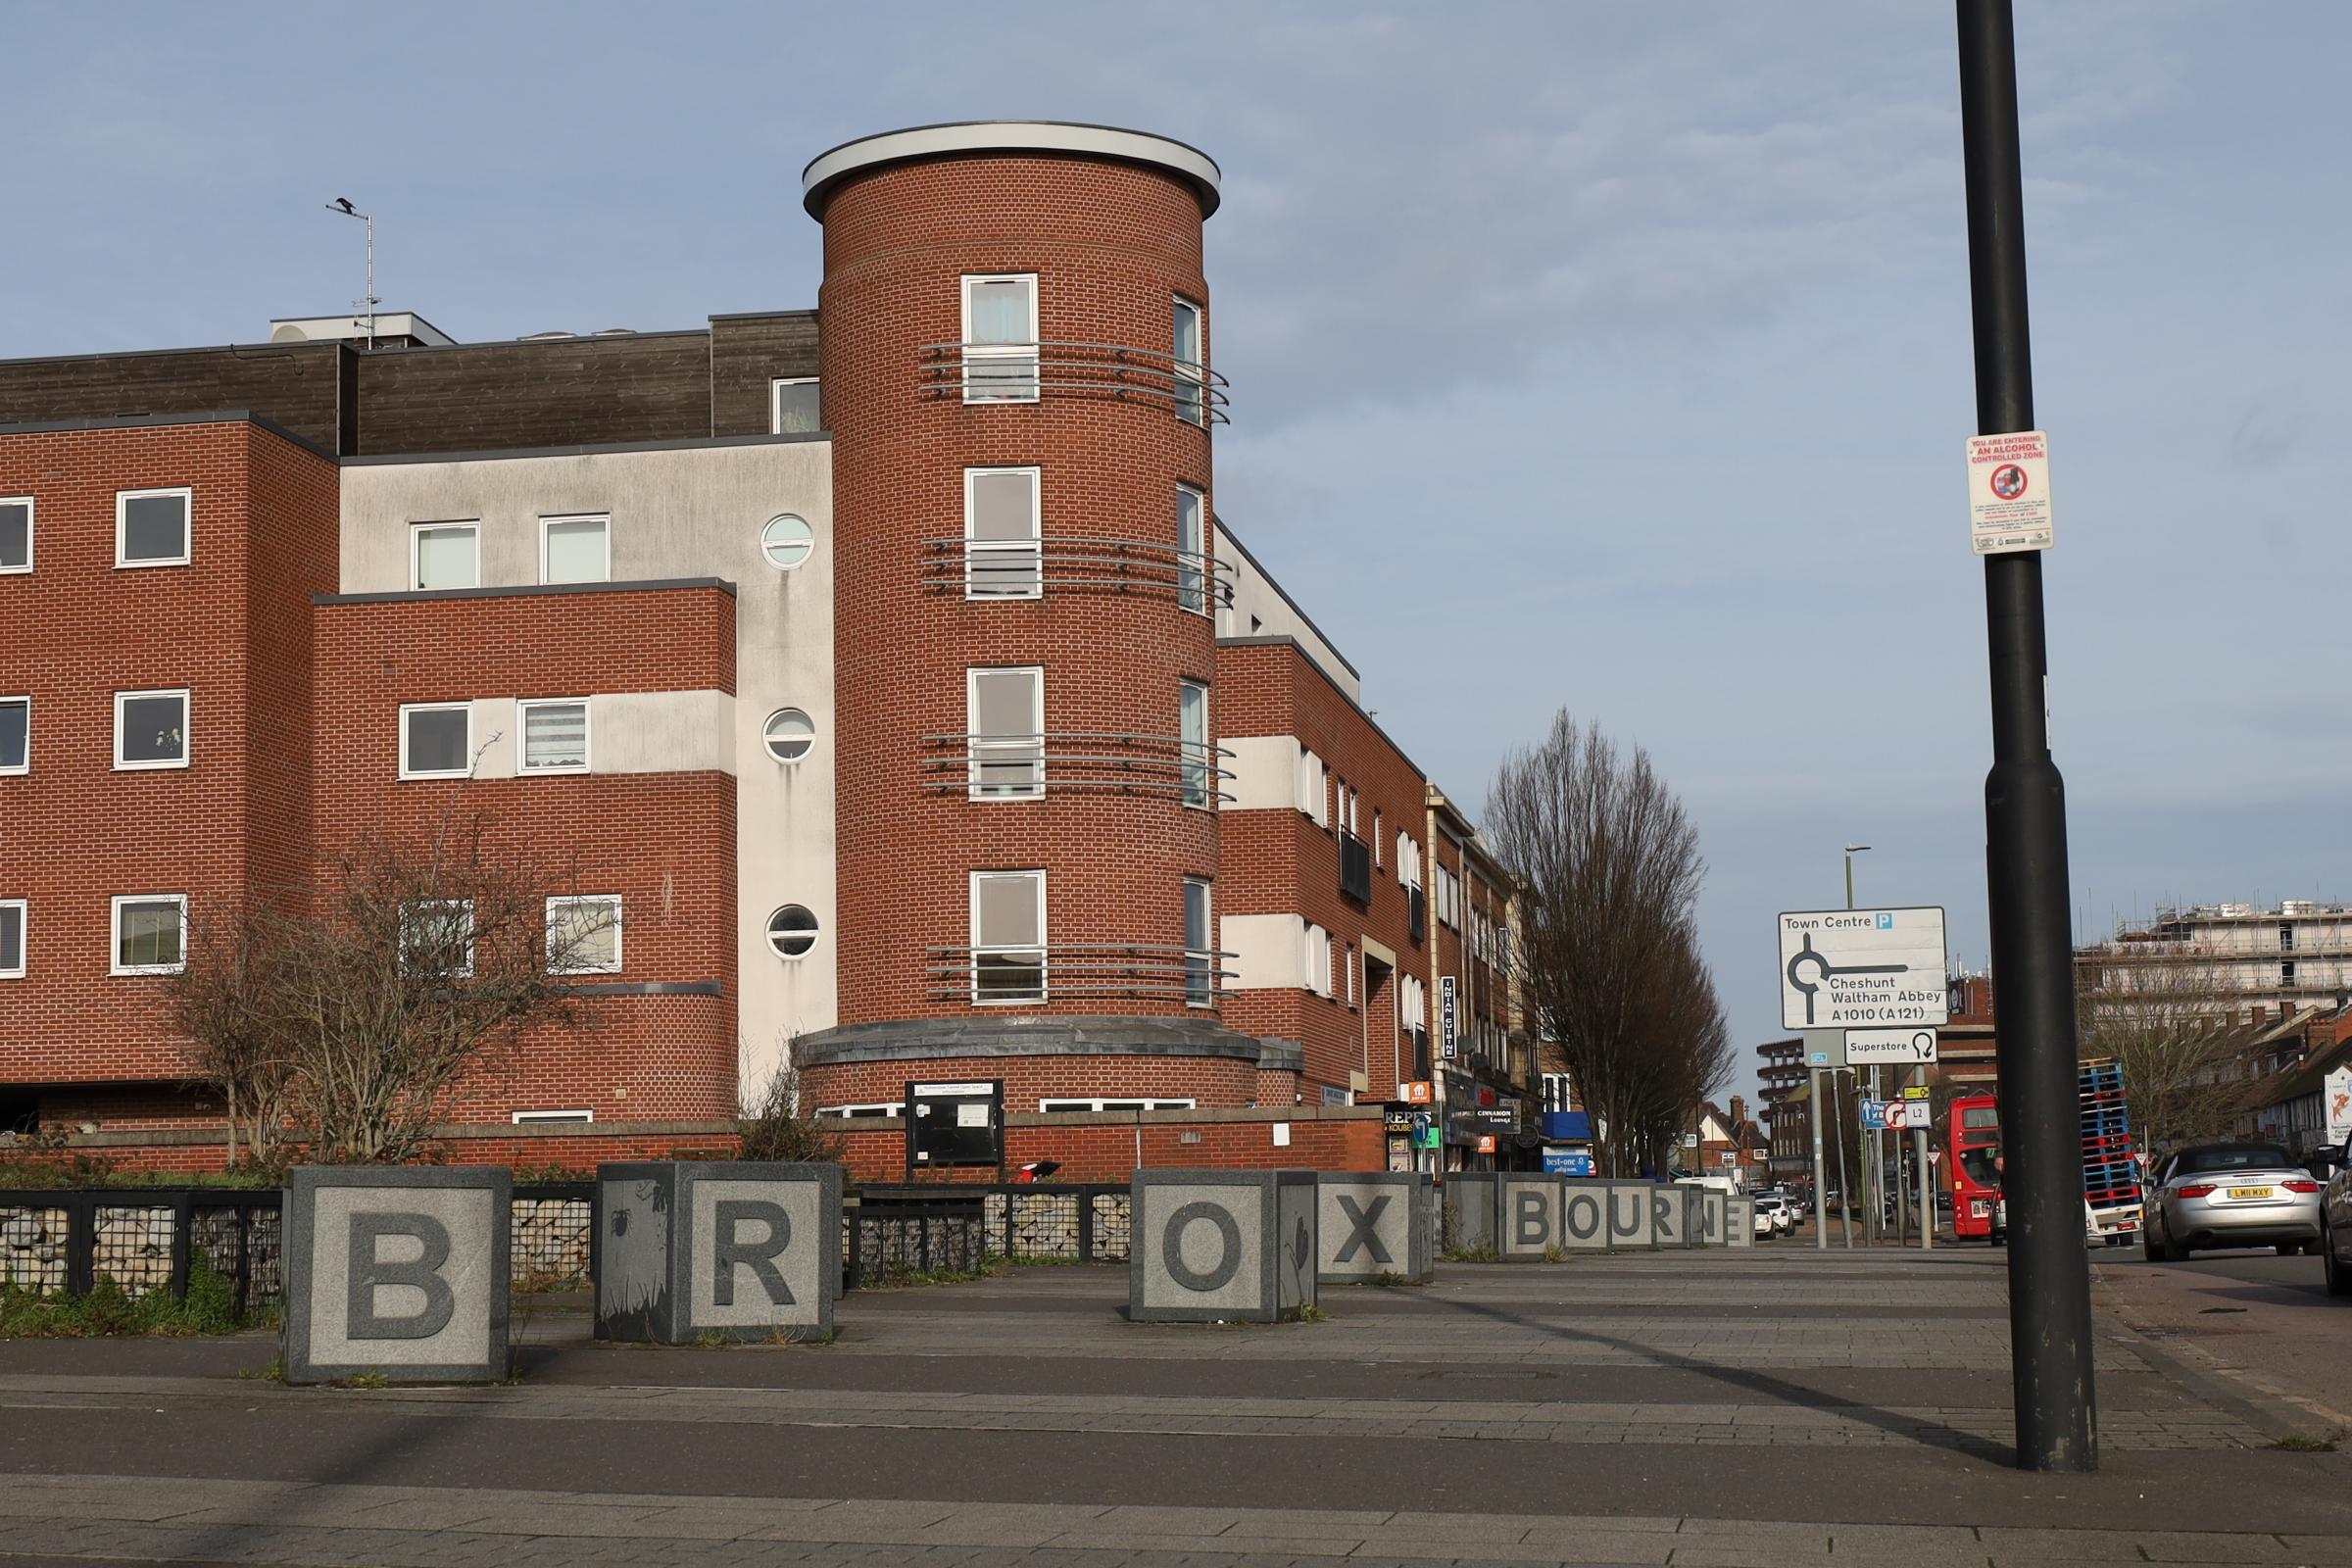 A Broxbourne sign at Waltham Cross, on the London and Hertfordshire boundary.